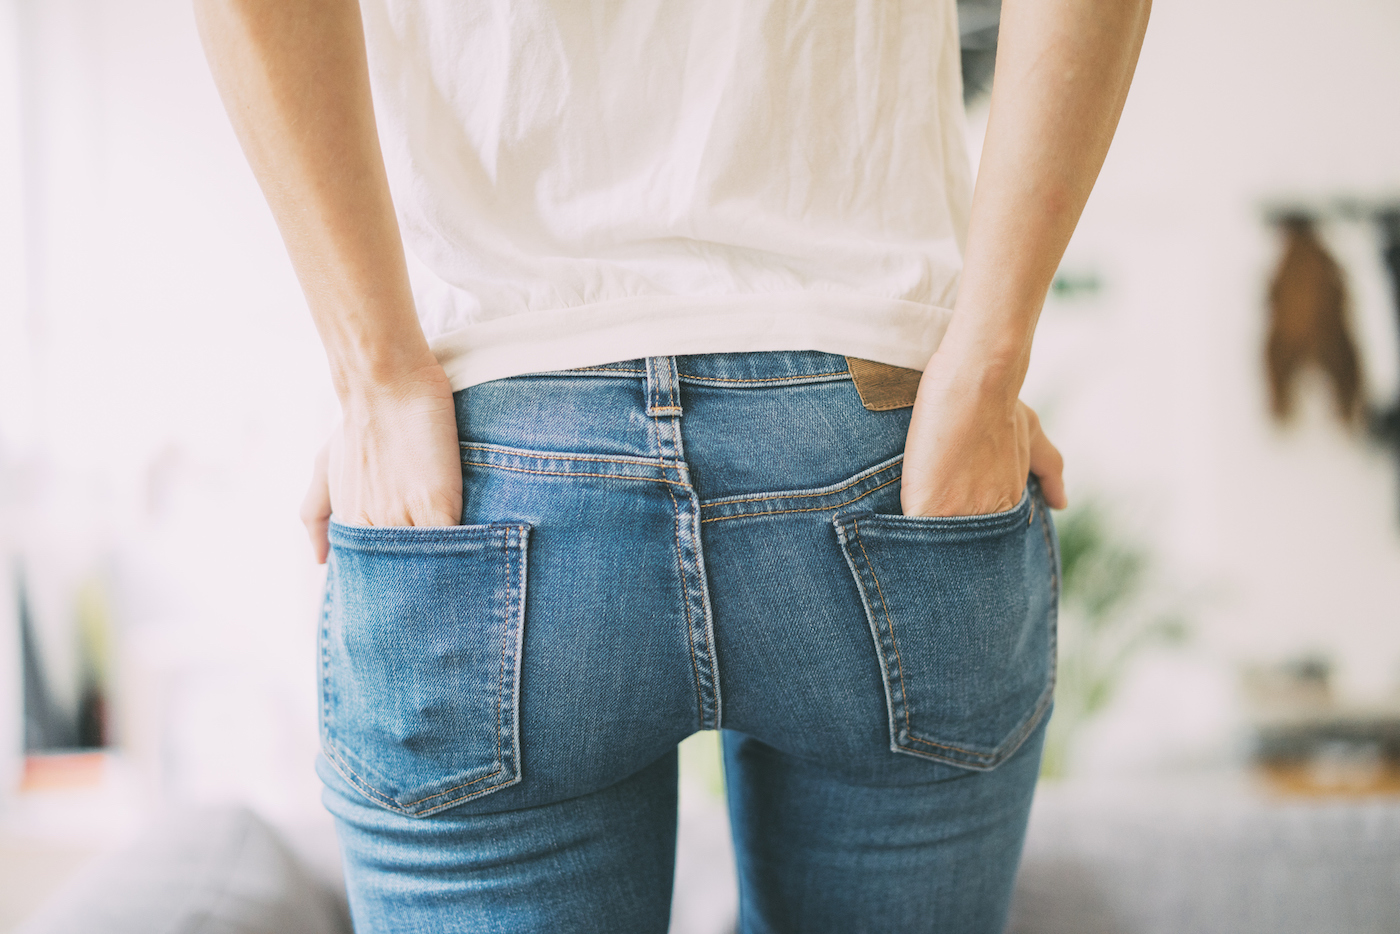 A woman wearing jeans seen from behind.